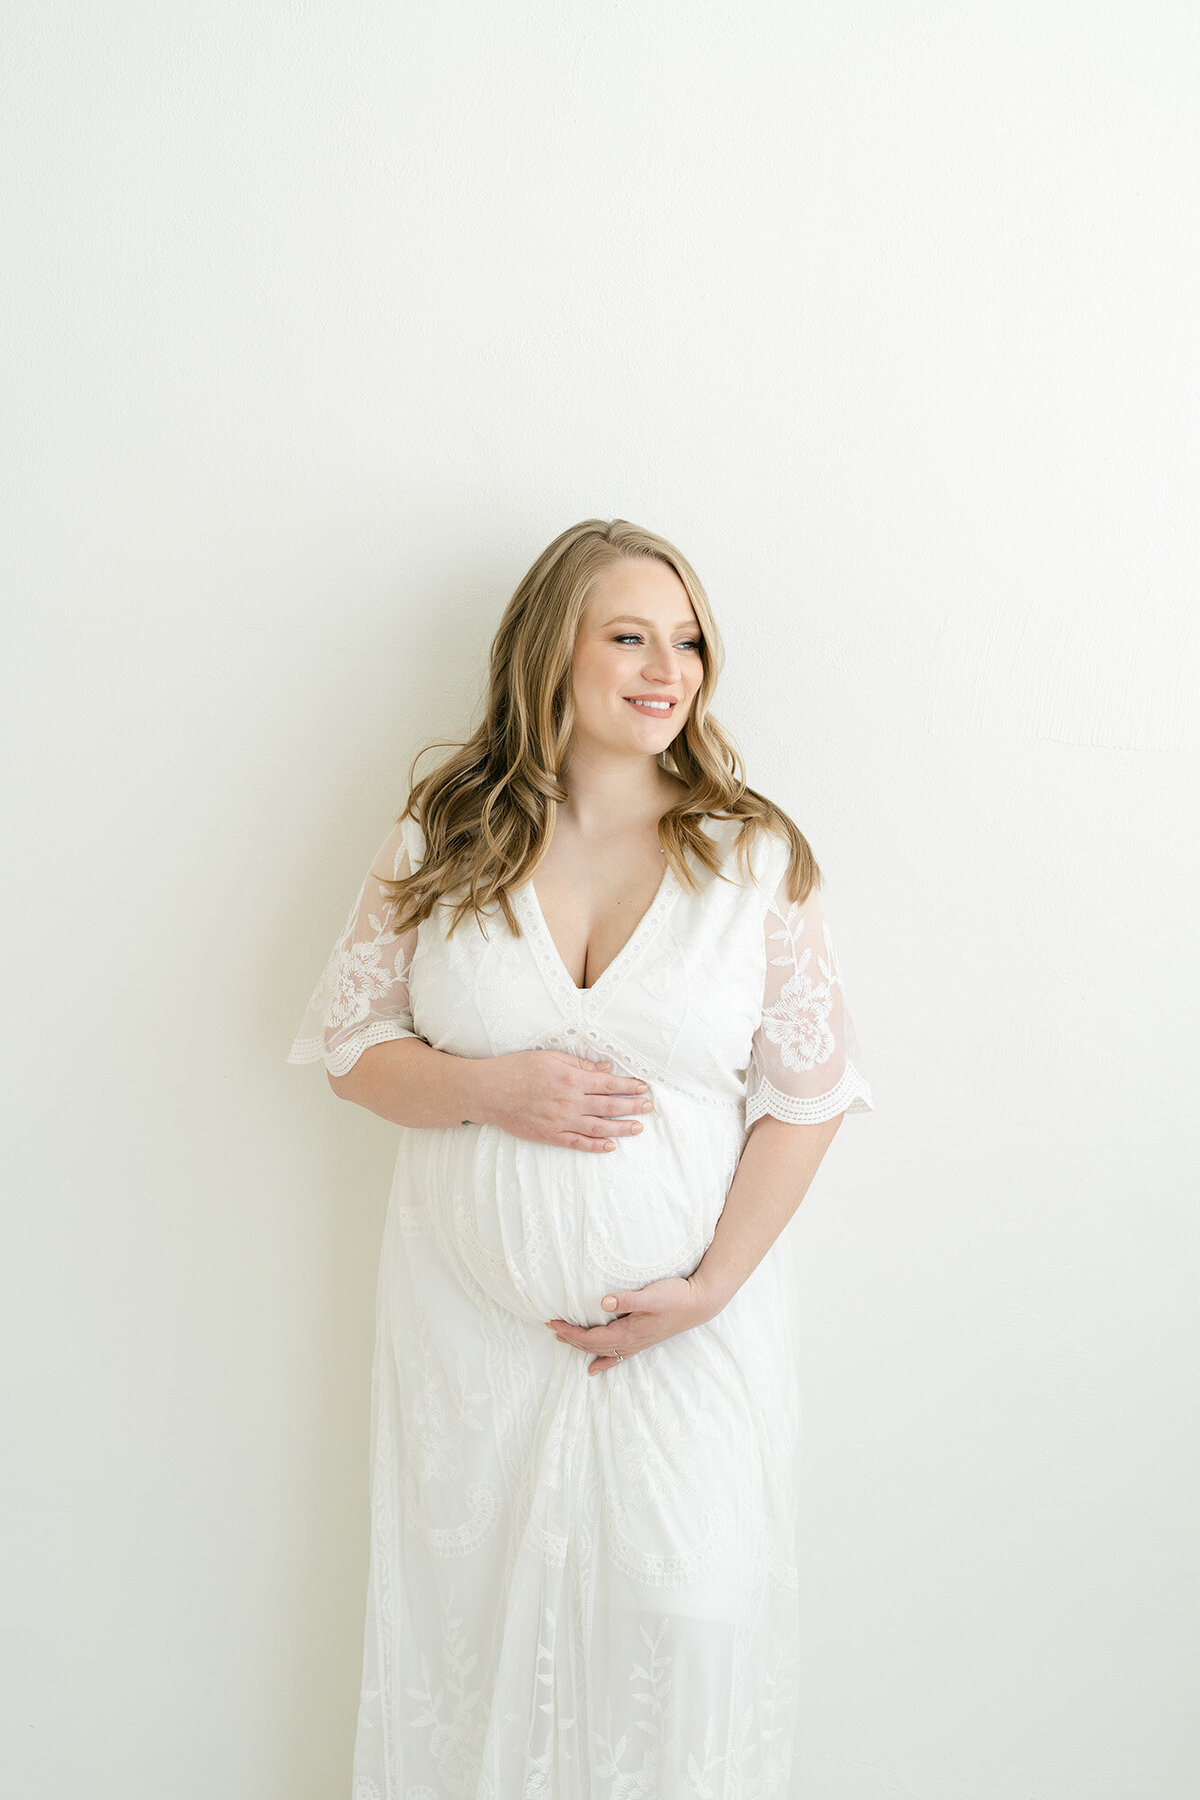 Perfect white dress for maternity photo shoot is available at Julie Brock Photography in Louisville KY